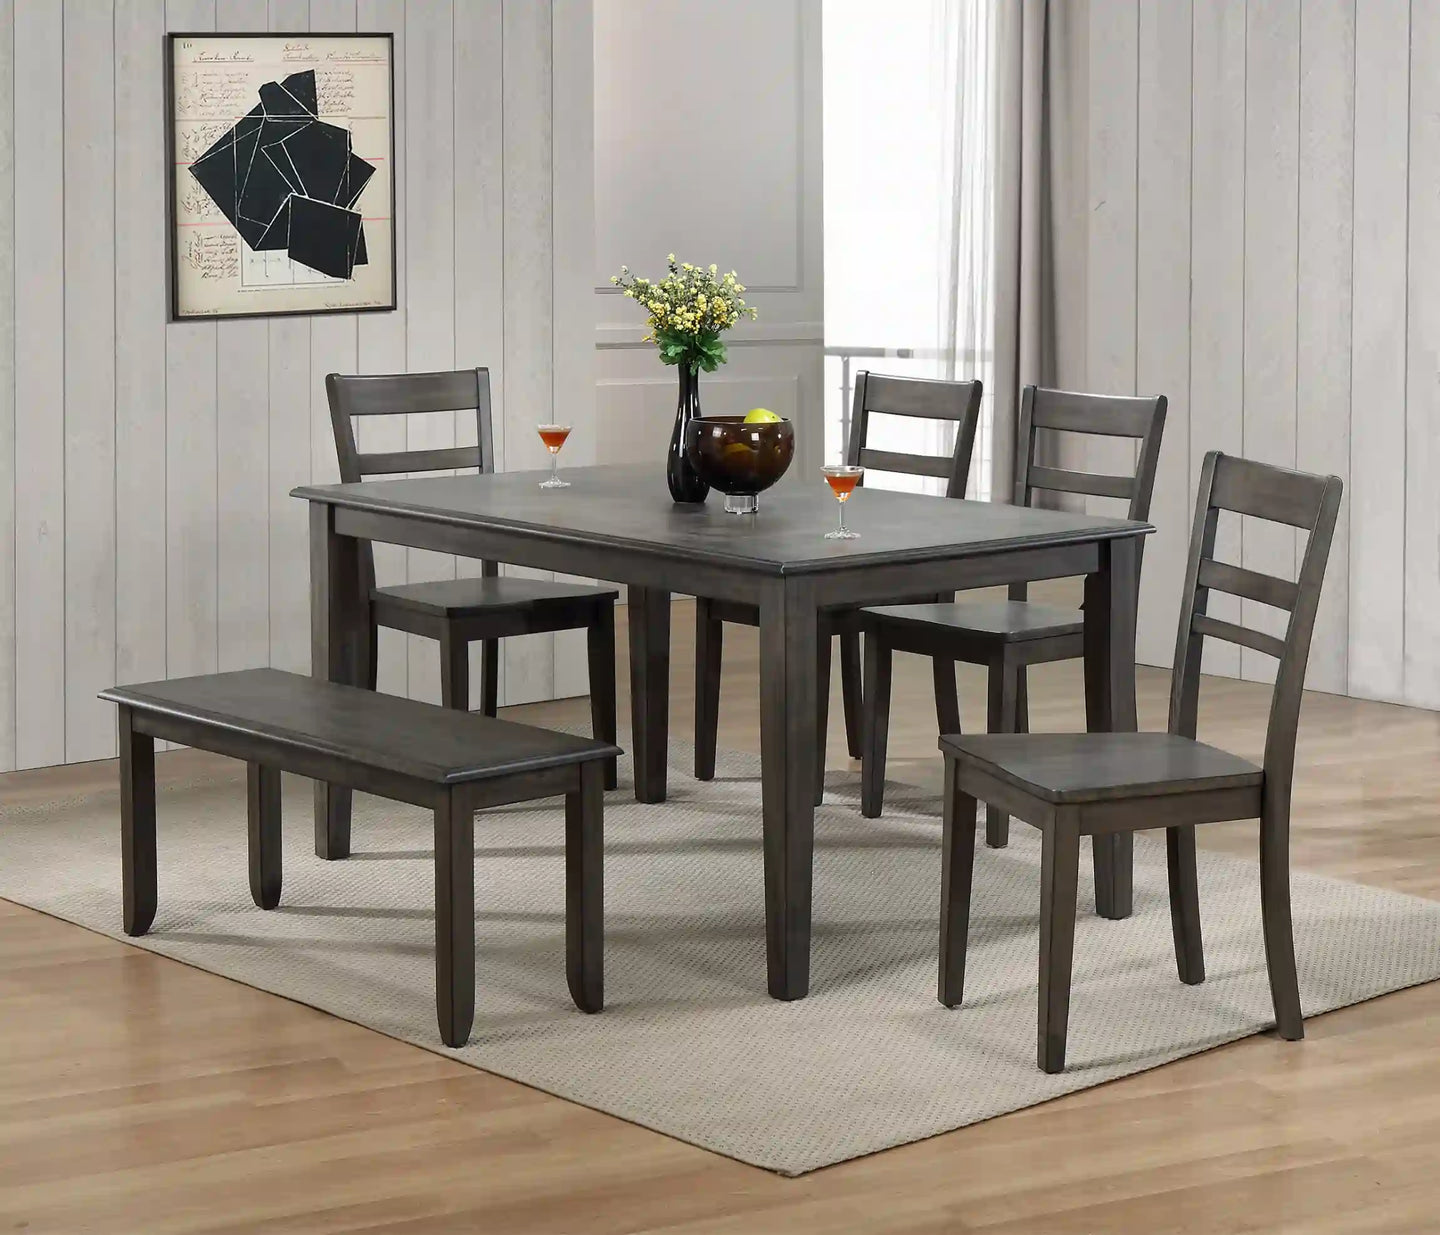 Sunset Trading Shades of Gray Slat Back Dining Chair